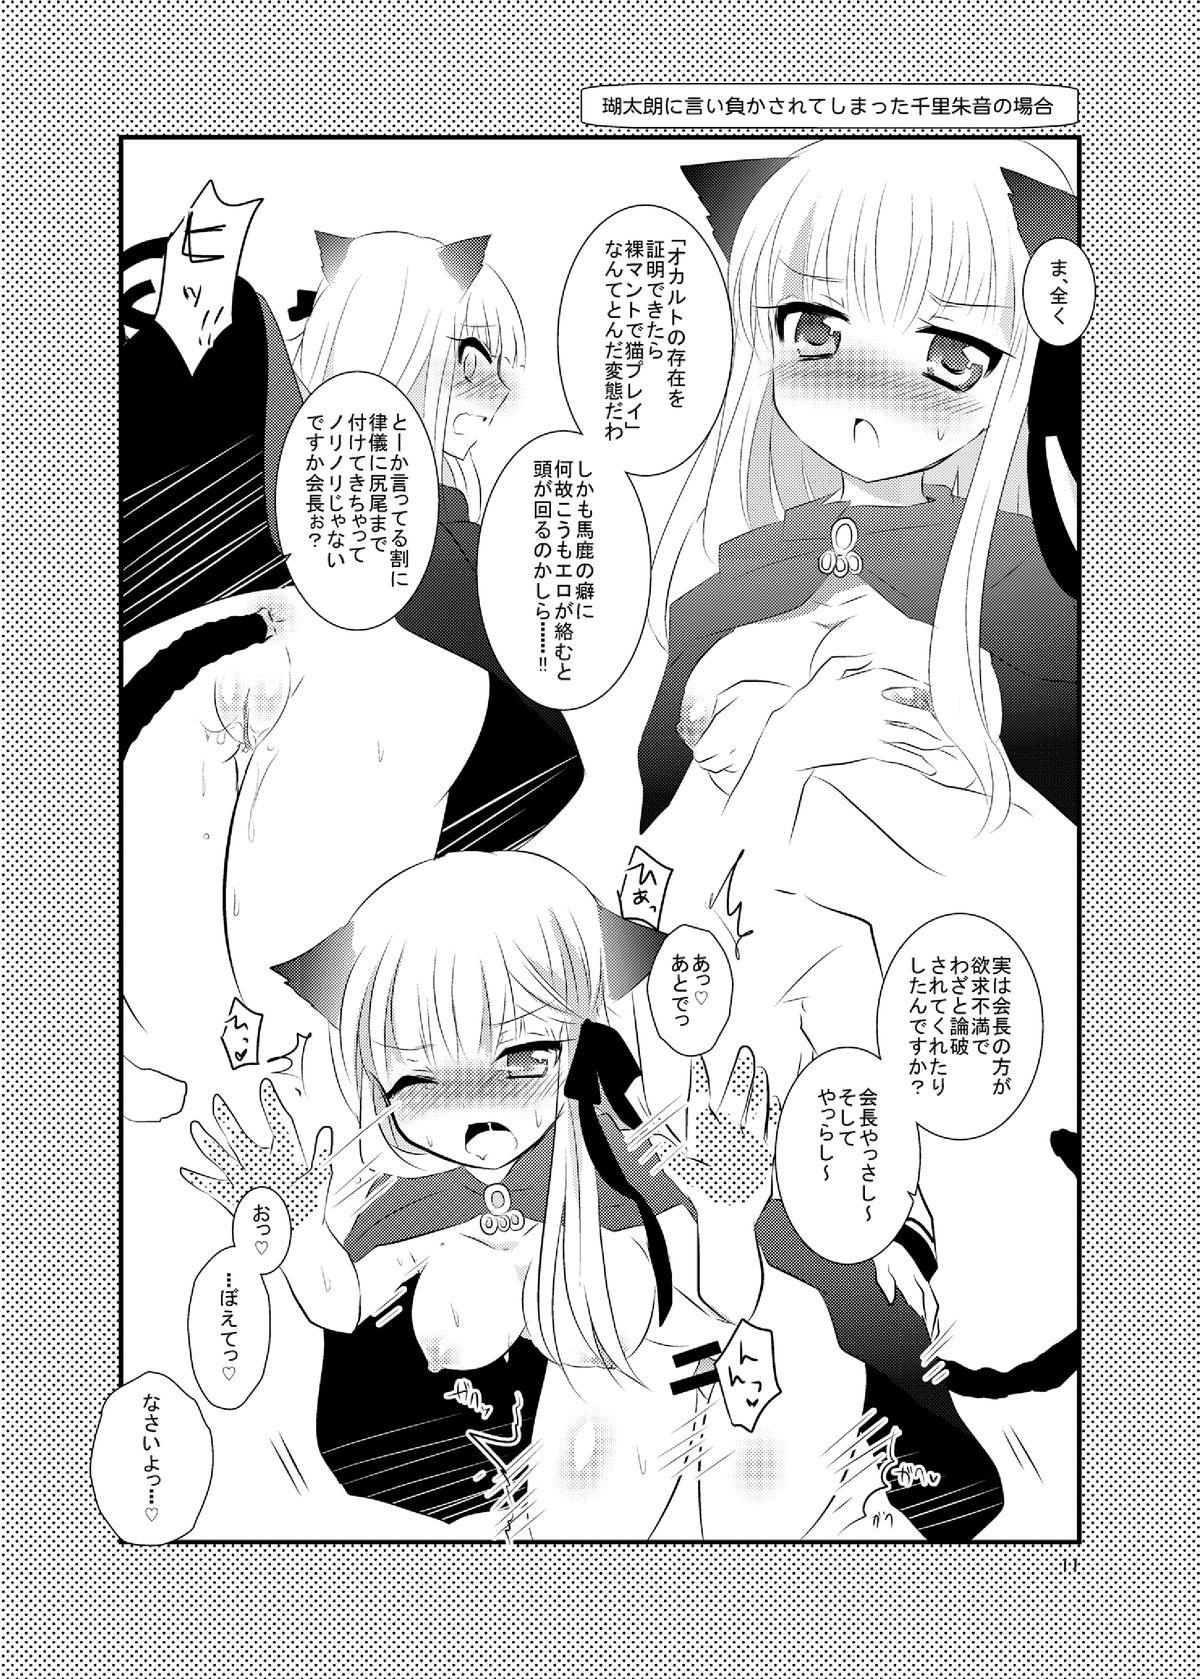 Cocks Harvest you! - Rewrite Grosso - Page 10